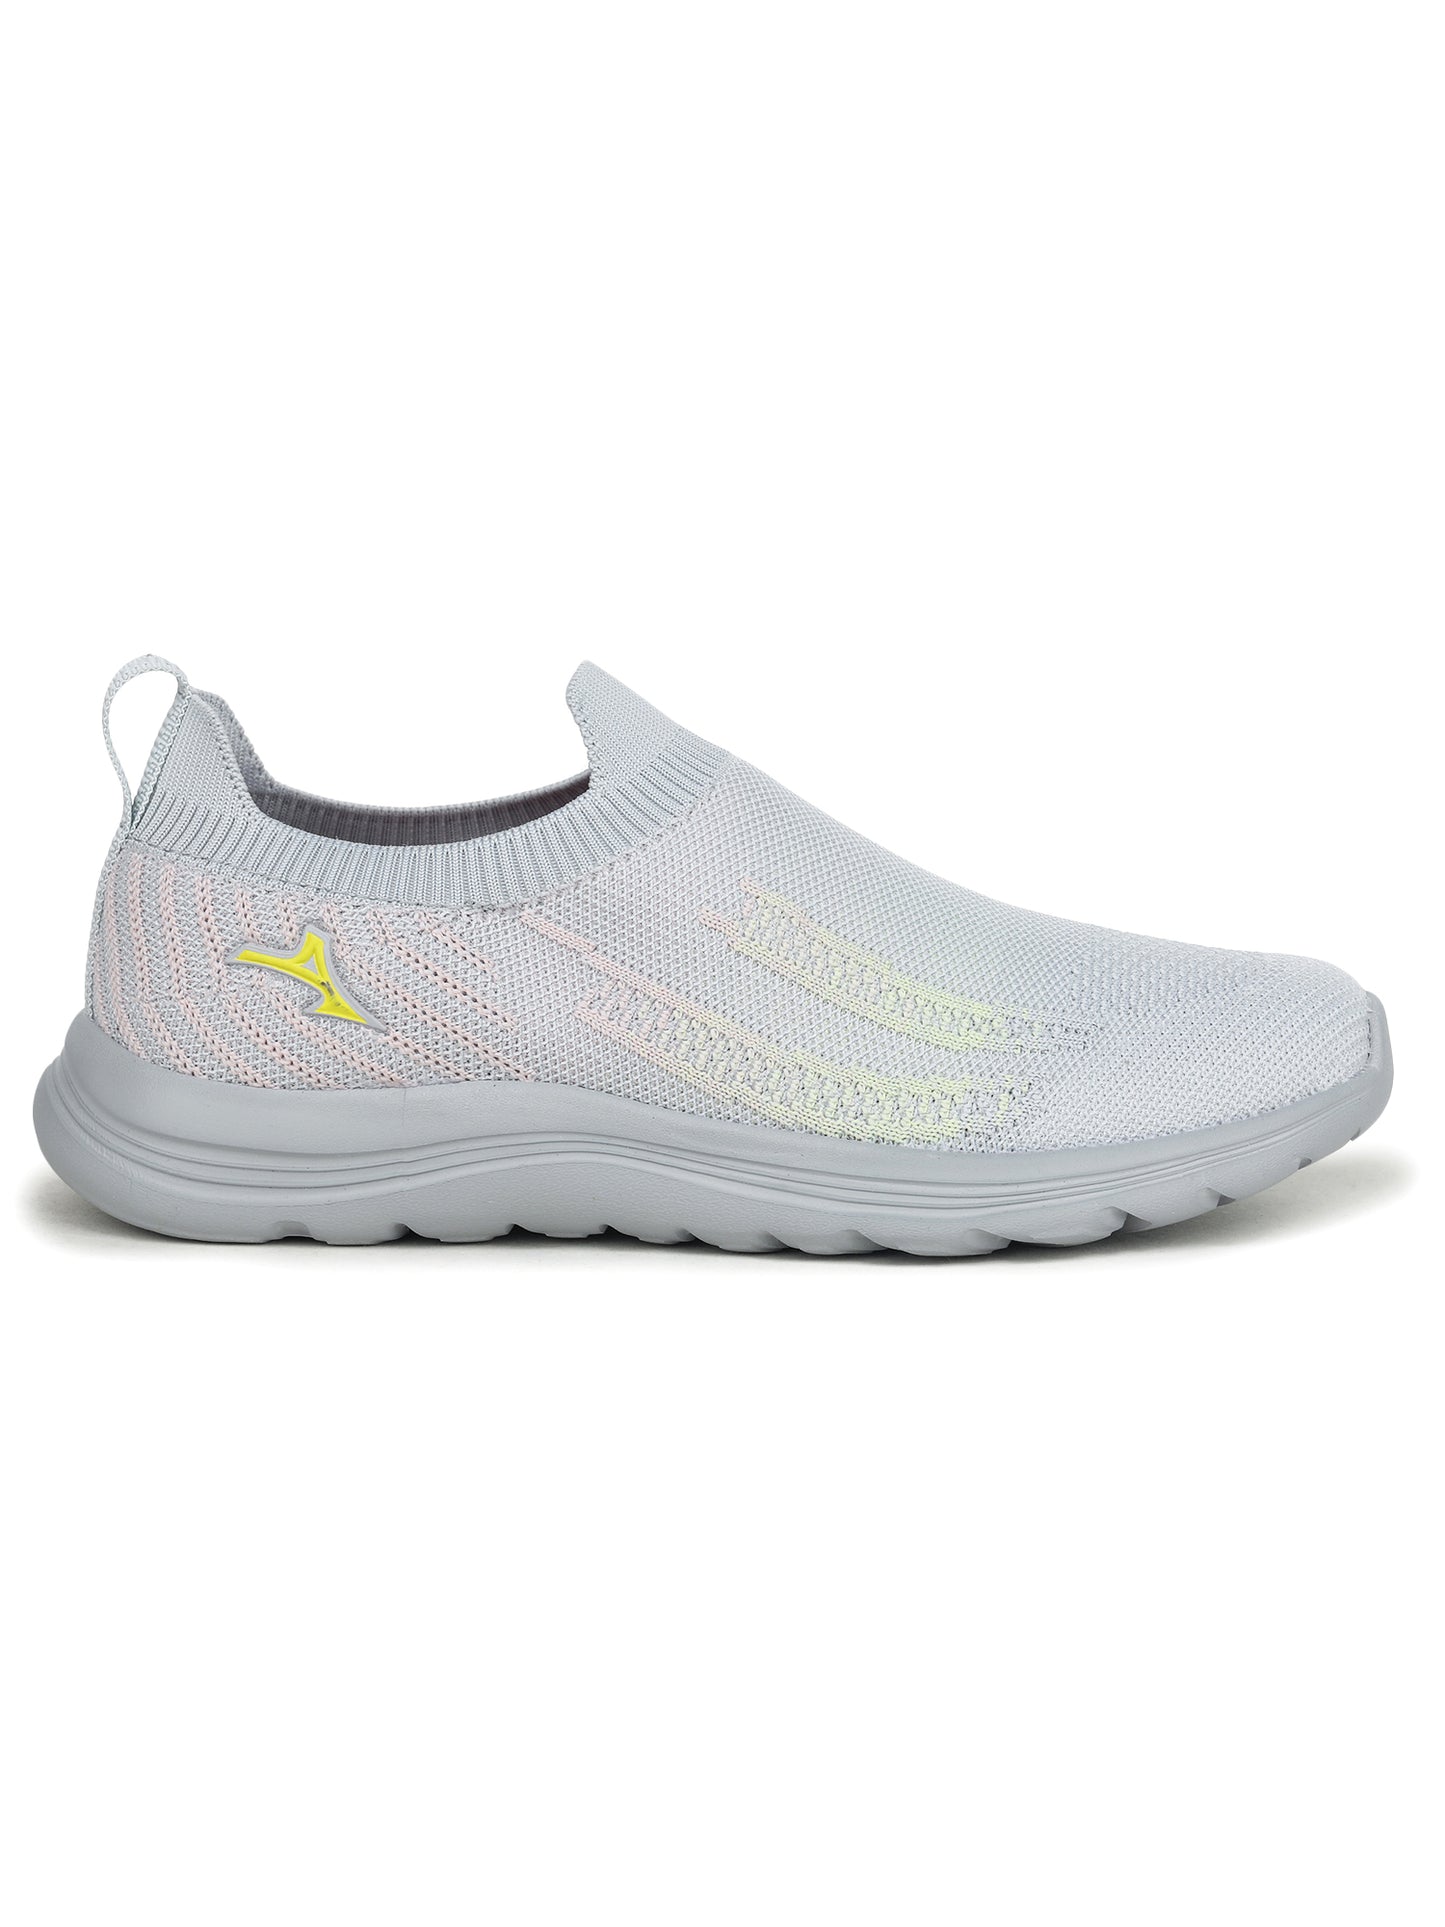 ABROS FROZA SPORTS SHOES FOR WOMEN